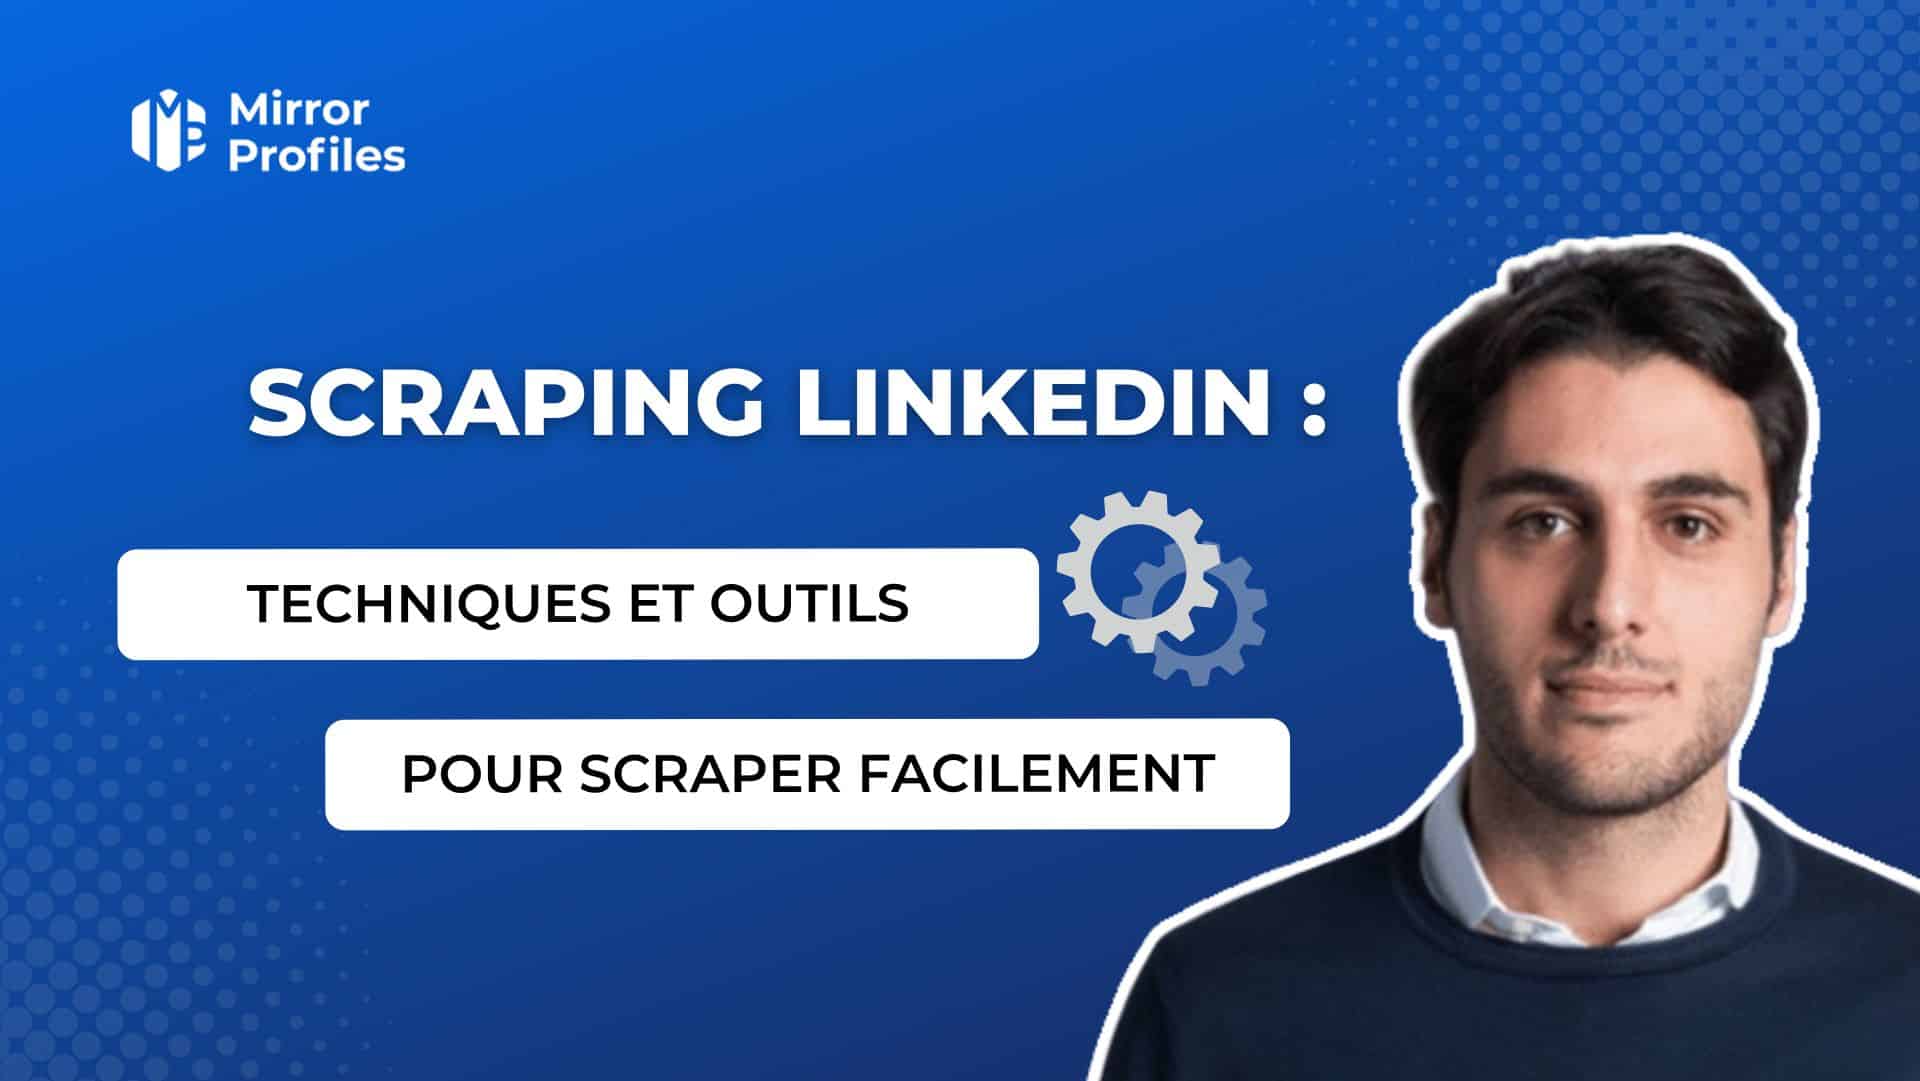 A promotional image for "Scraping LinkedIn: Techniques and Tools for Easy Scraping," featuring a headshot of a man and a gear icon on a blue background. Mirror Profiles logo is in the top left corner, highlighting efficient scraper techniques.